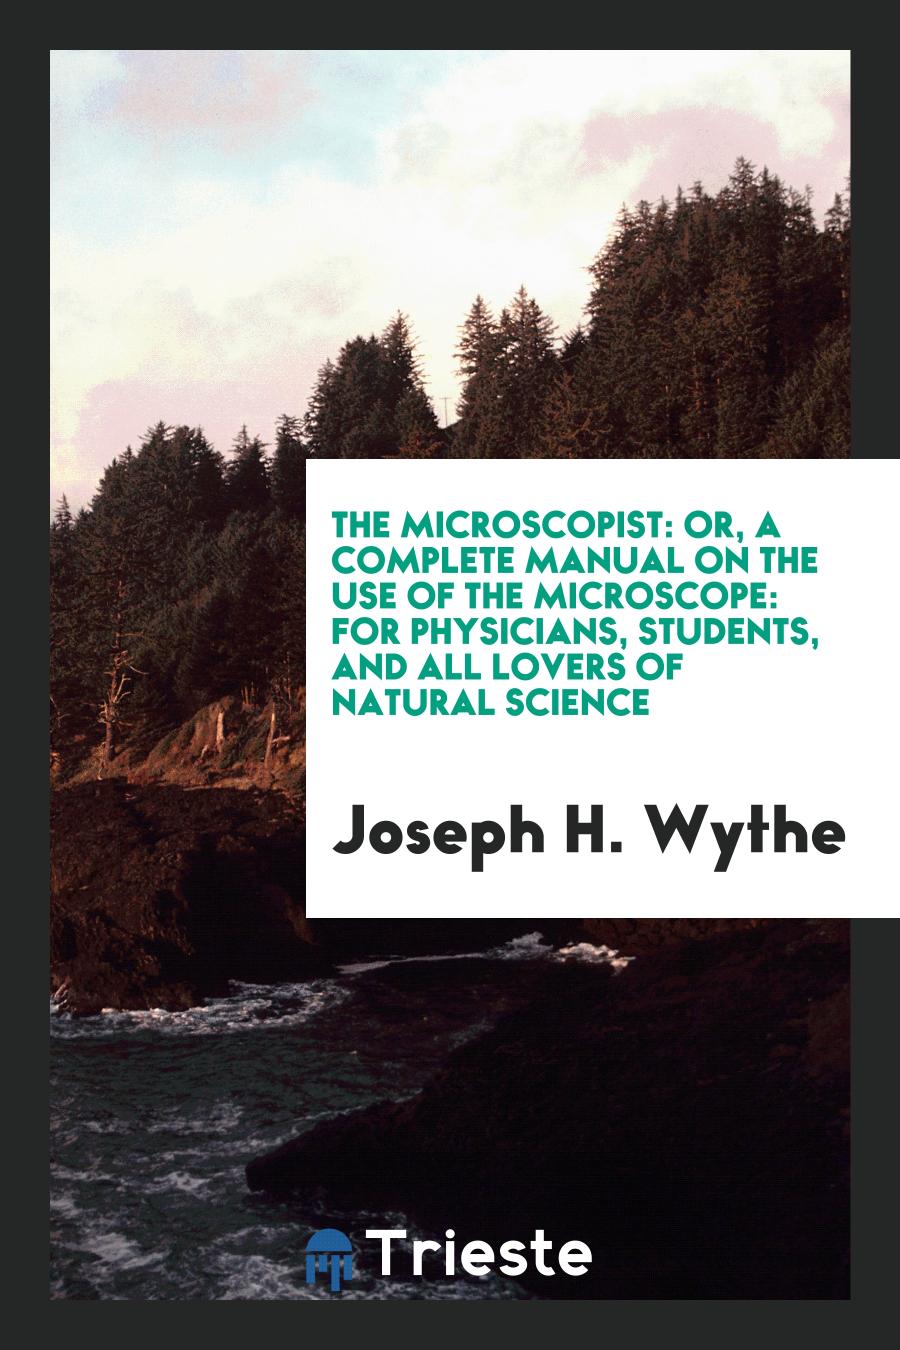 The Microscopist: Or, a Complete Manual on the Use of the Microscope: For Physicians, Students, and All Lovers of Natural Science